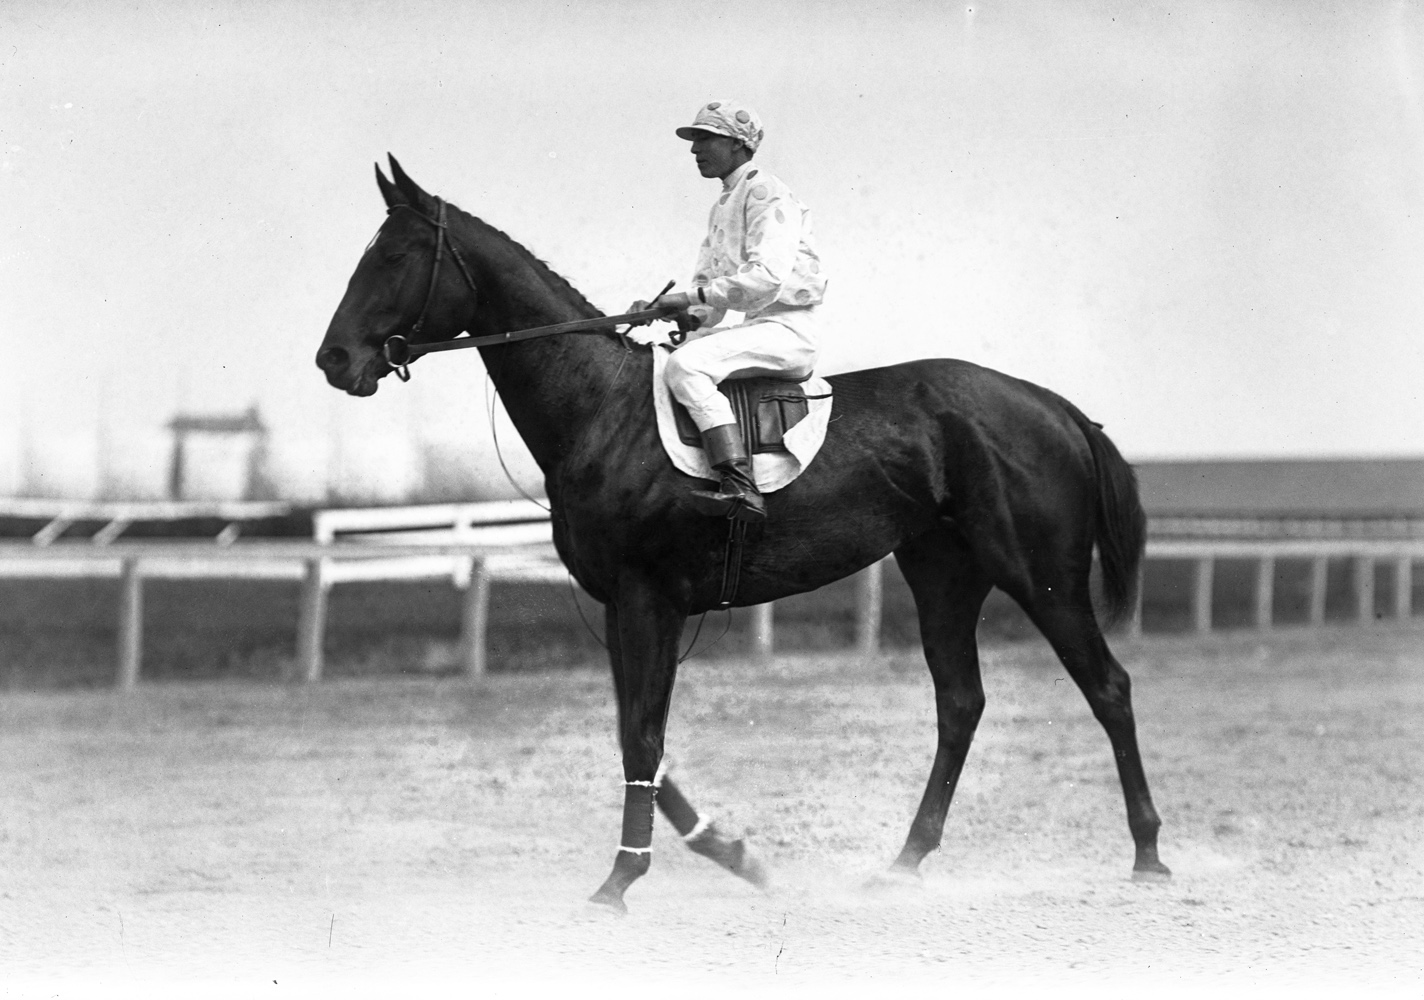 Maskette with Scoville up, 1909 (Keeneland Library Cook Collection)